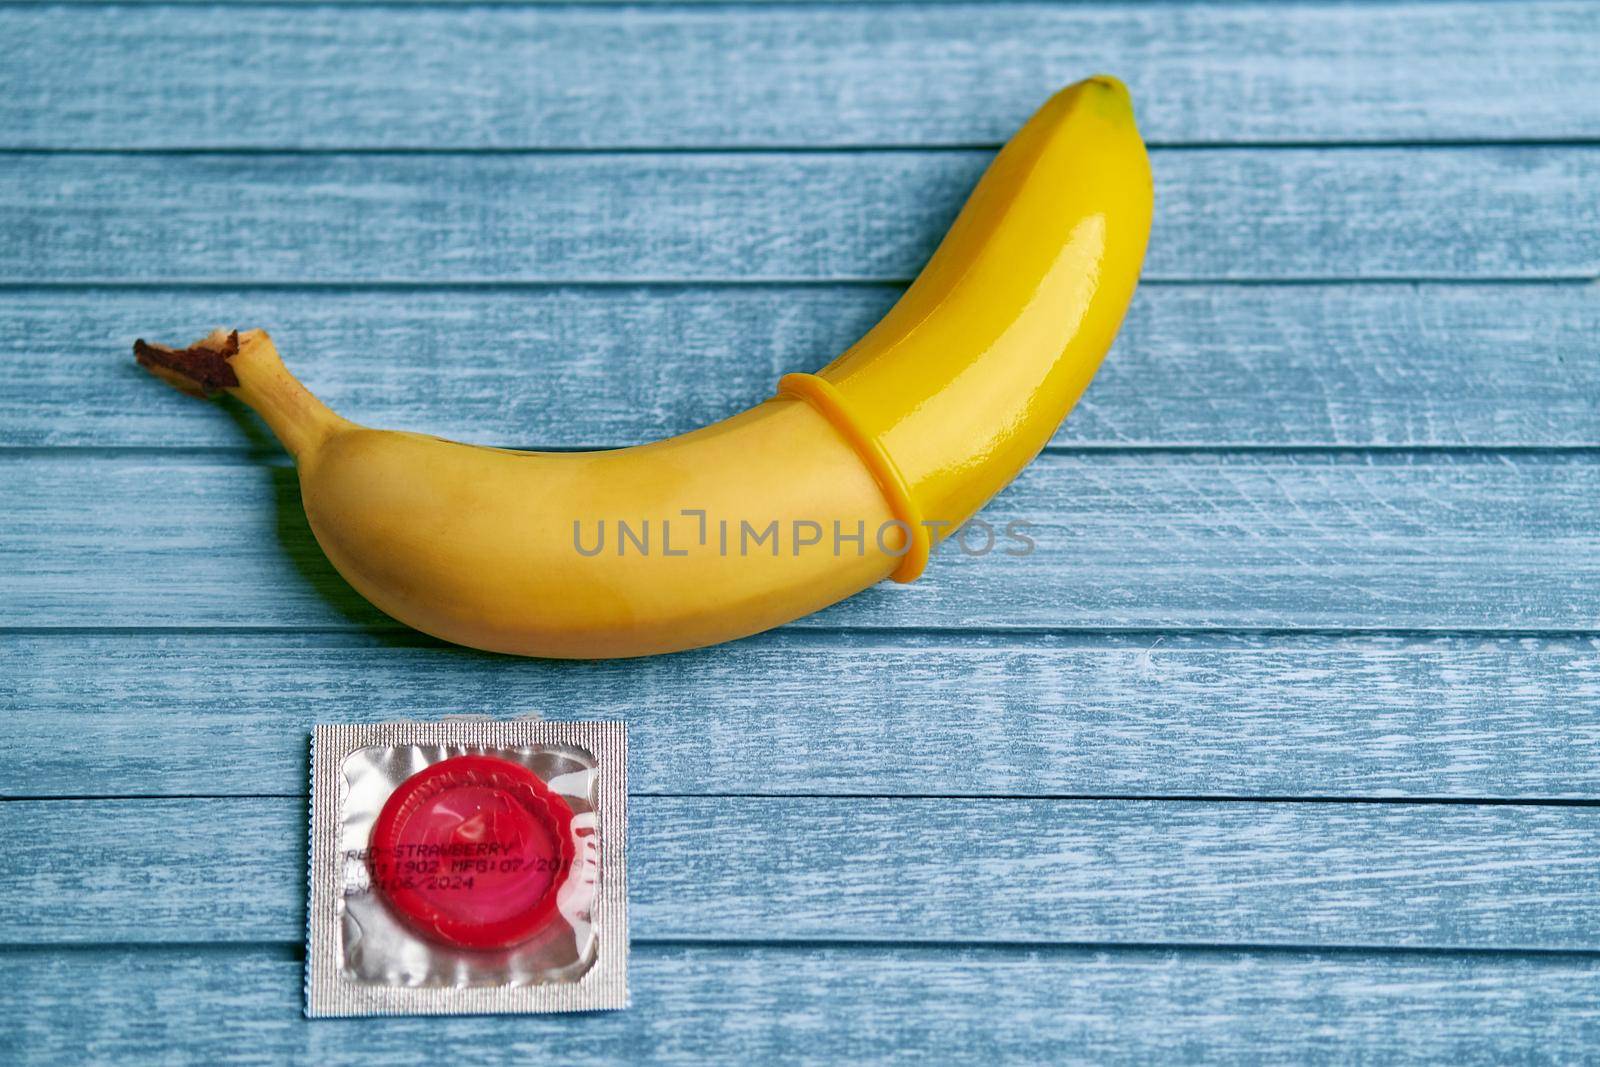 Red Condom and yellow banana lays on a blue wooden background